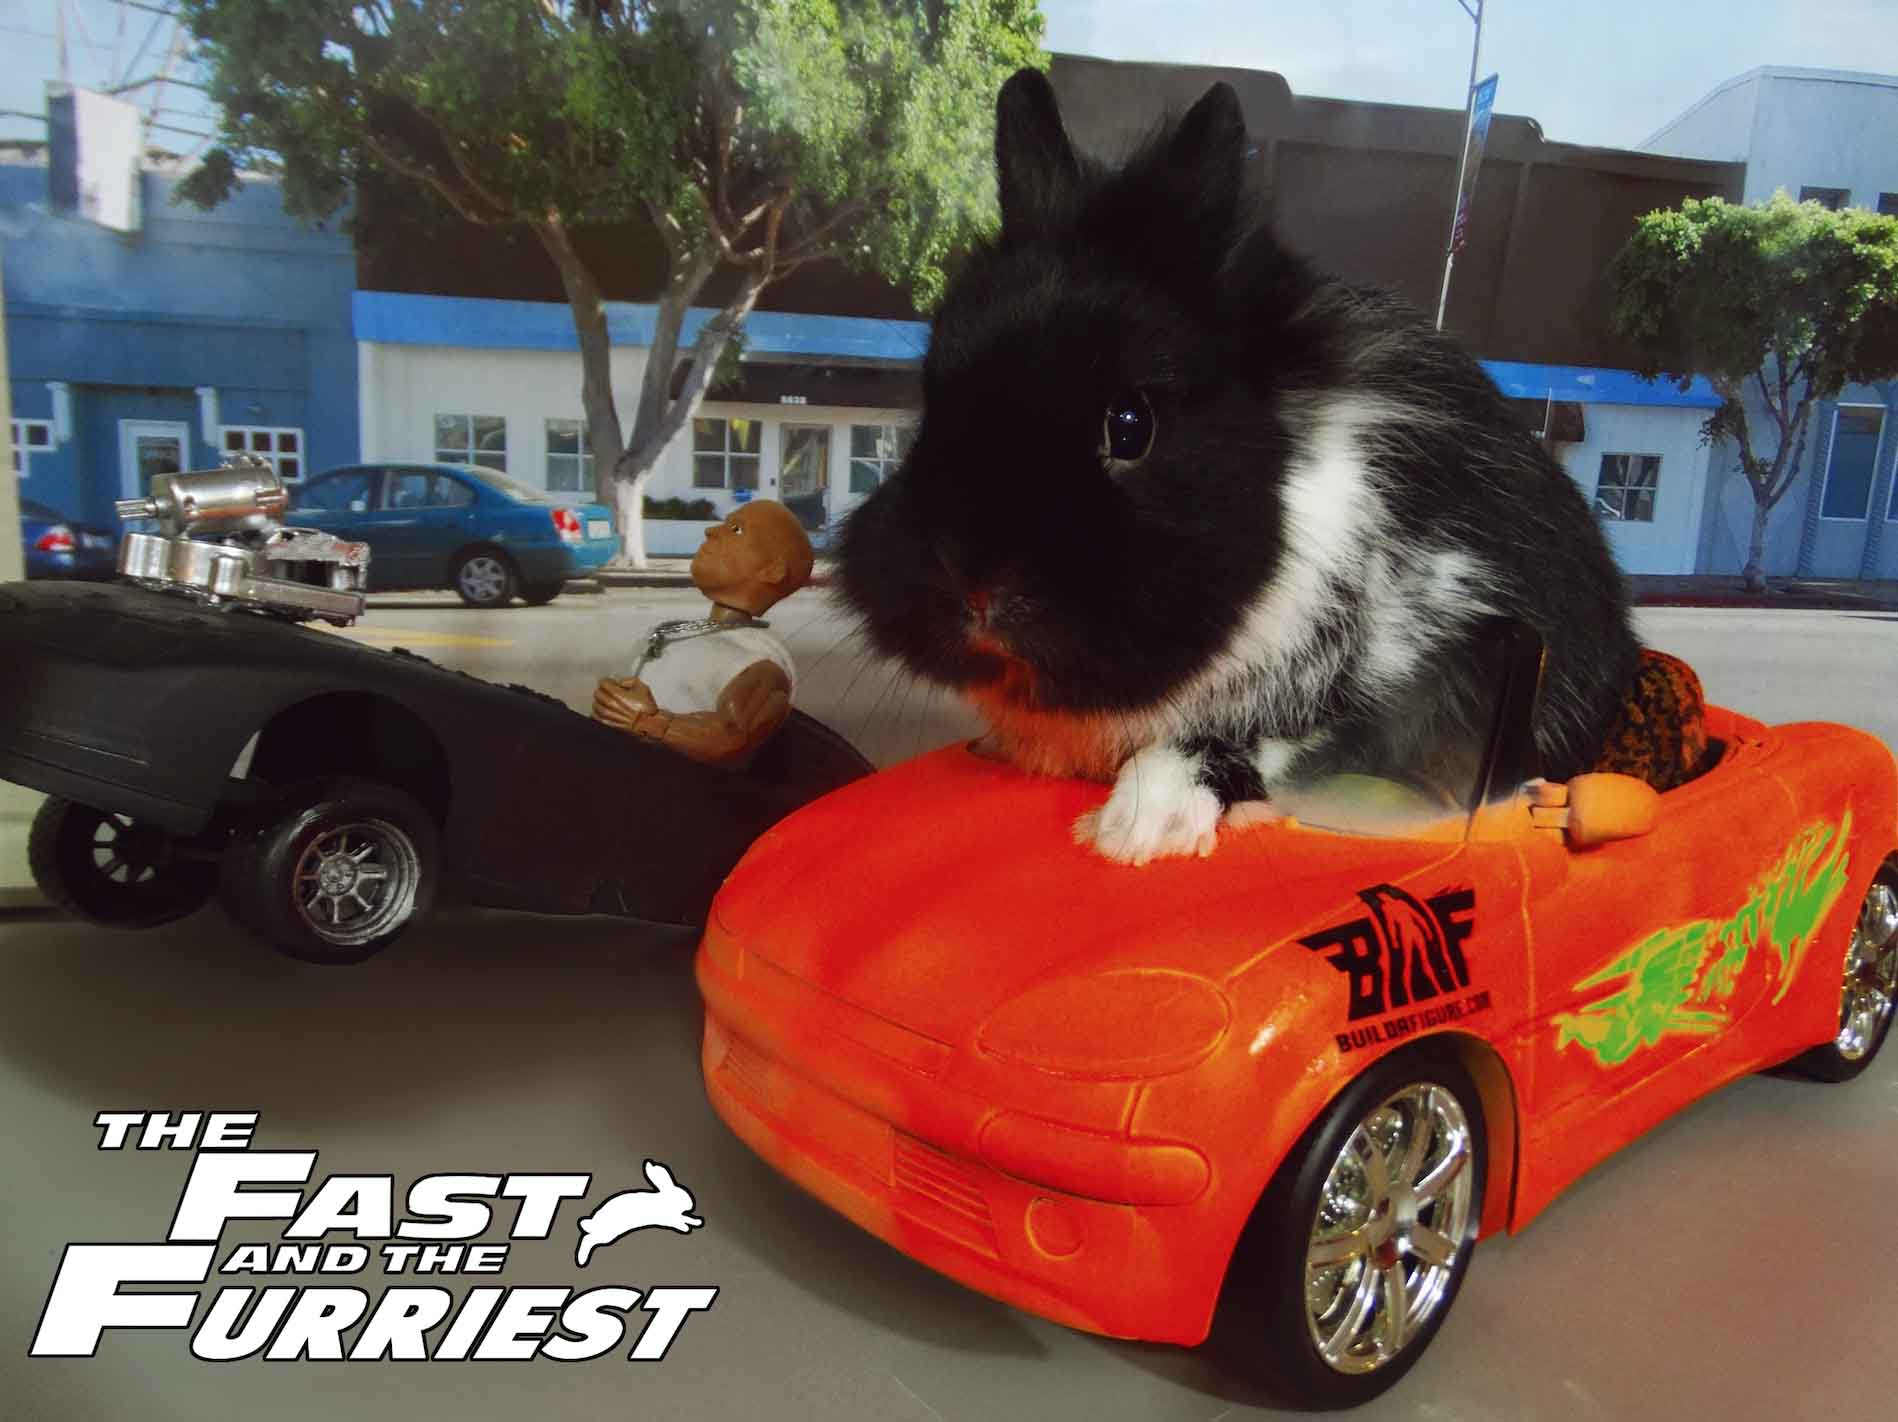 The Fast and the Furriest...